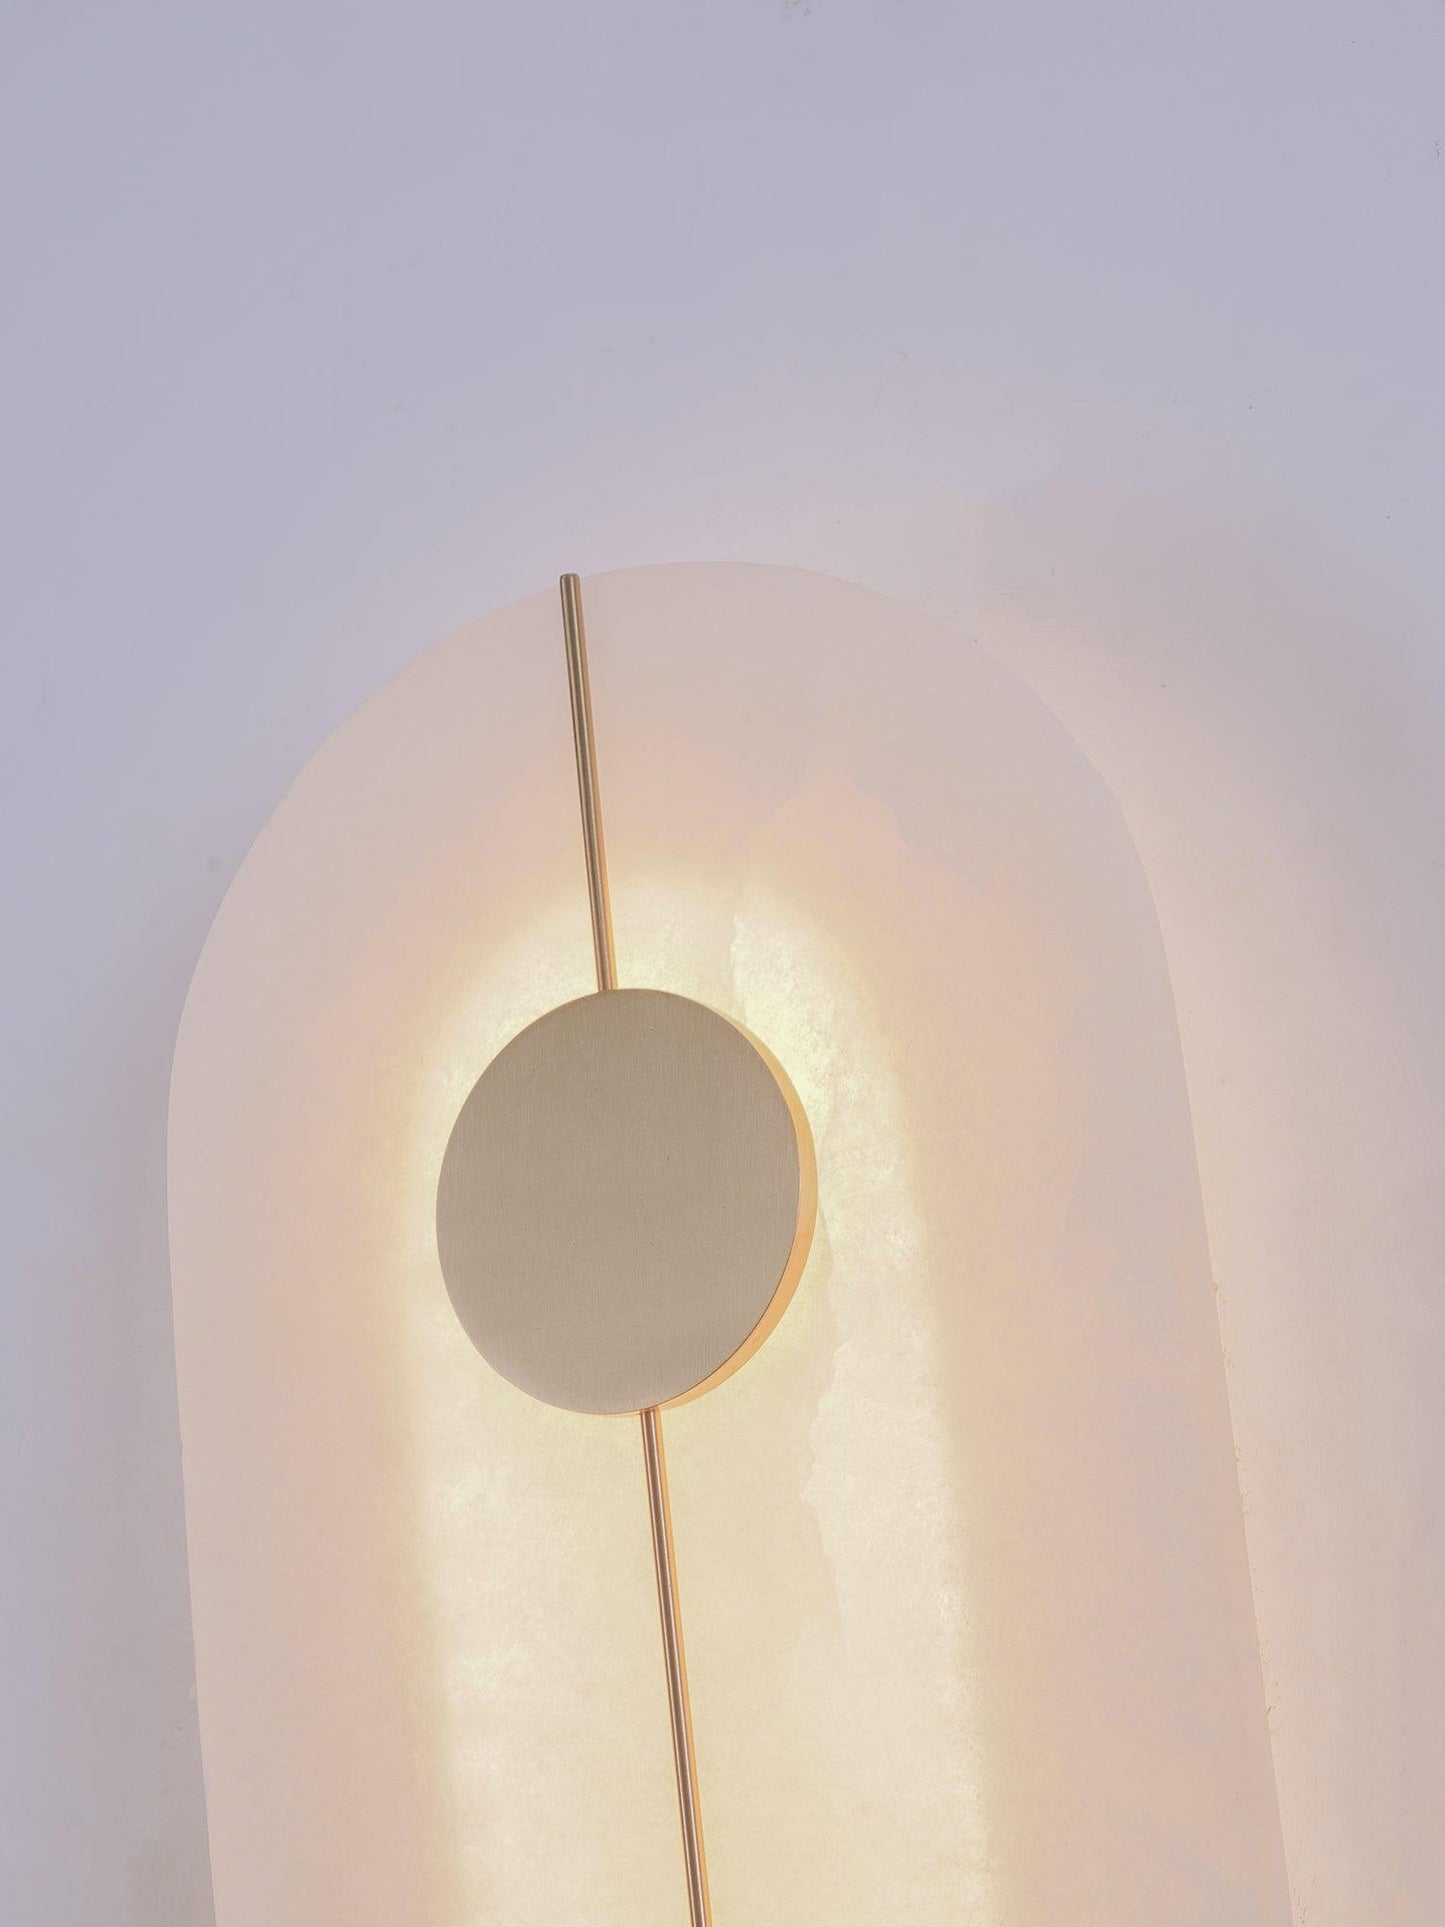 Artistic Marble Wall Lamp